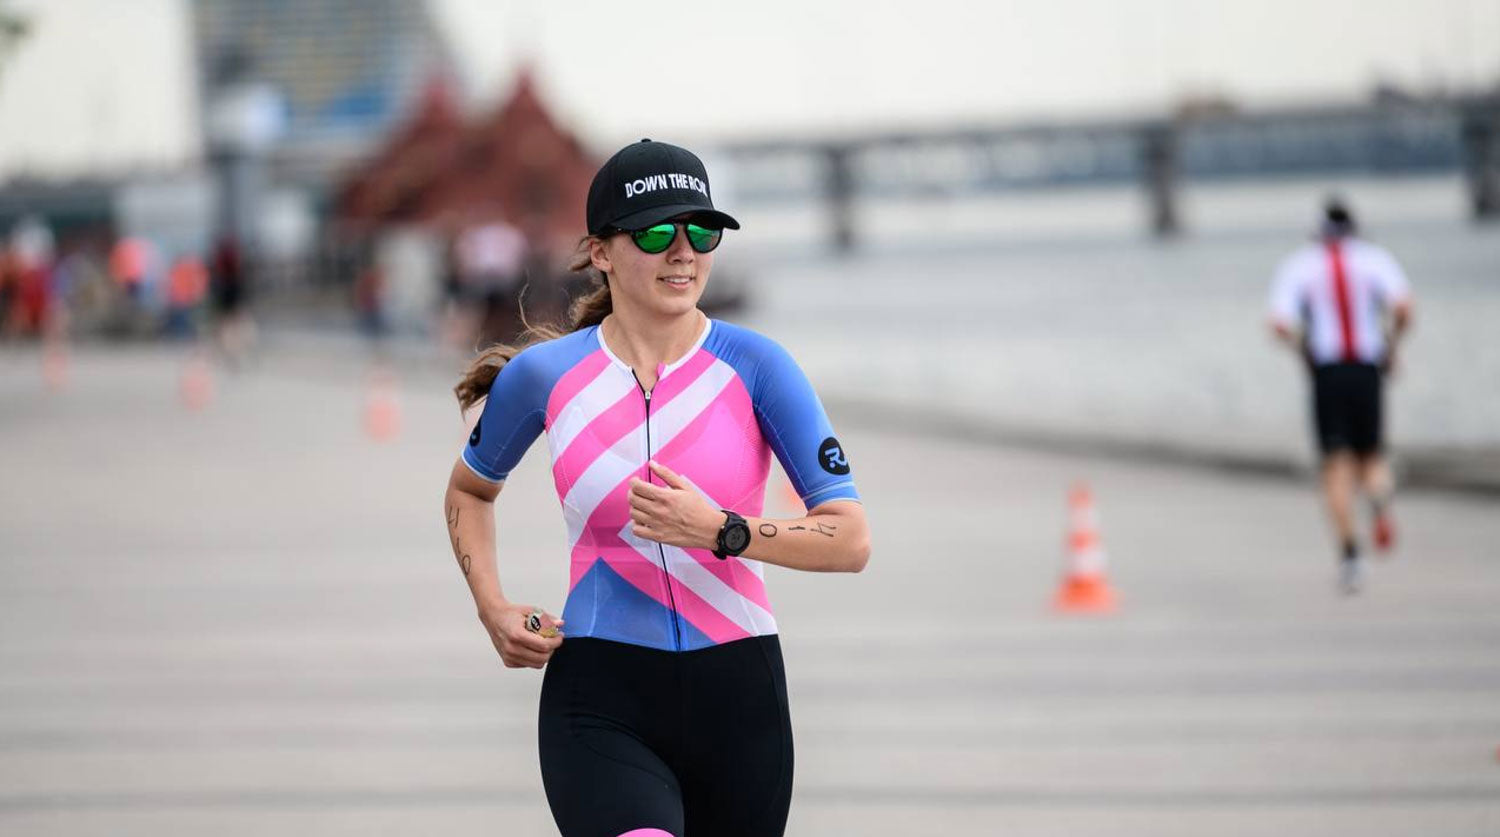 TRIATHLETE'S GUIDE TO PERFORMANCE APPAREL